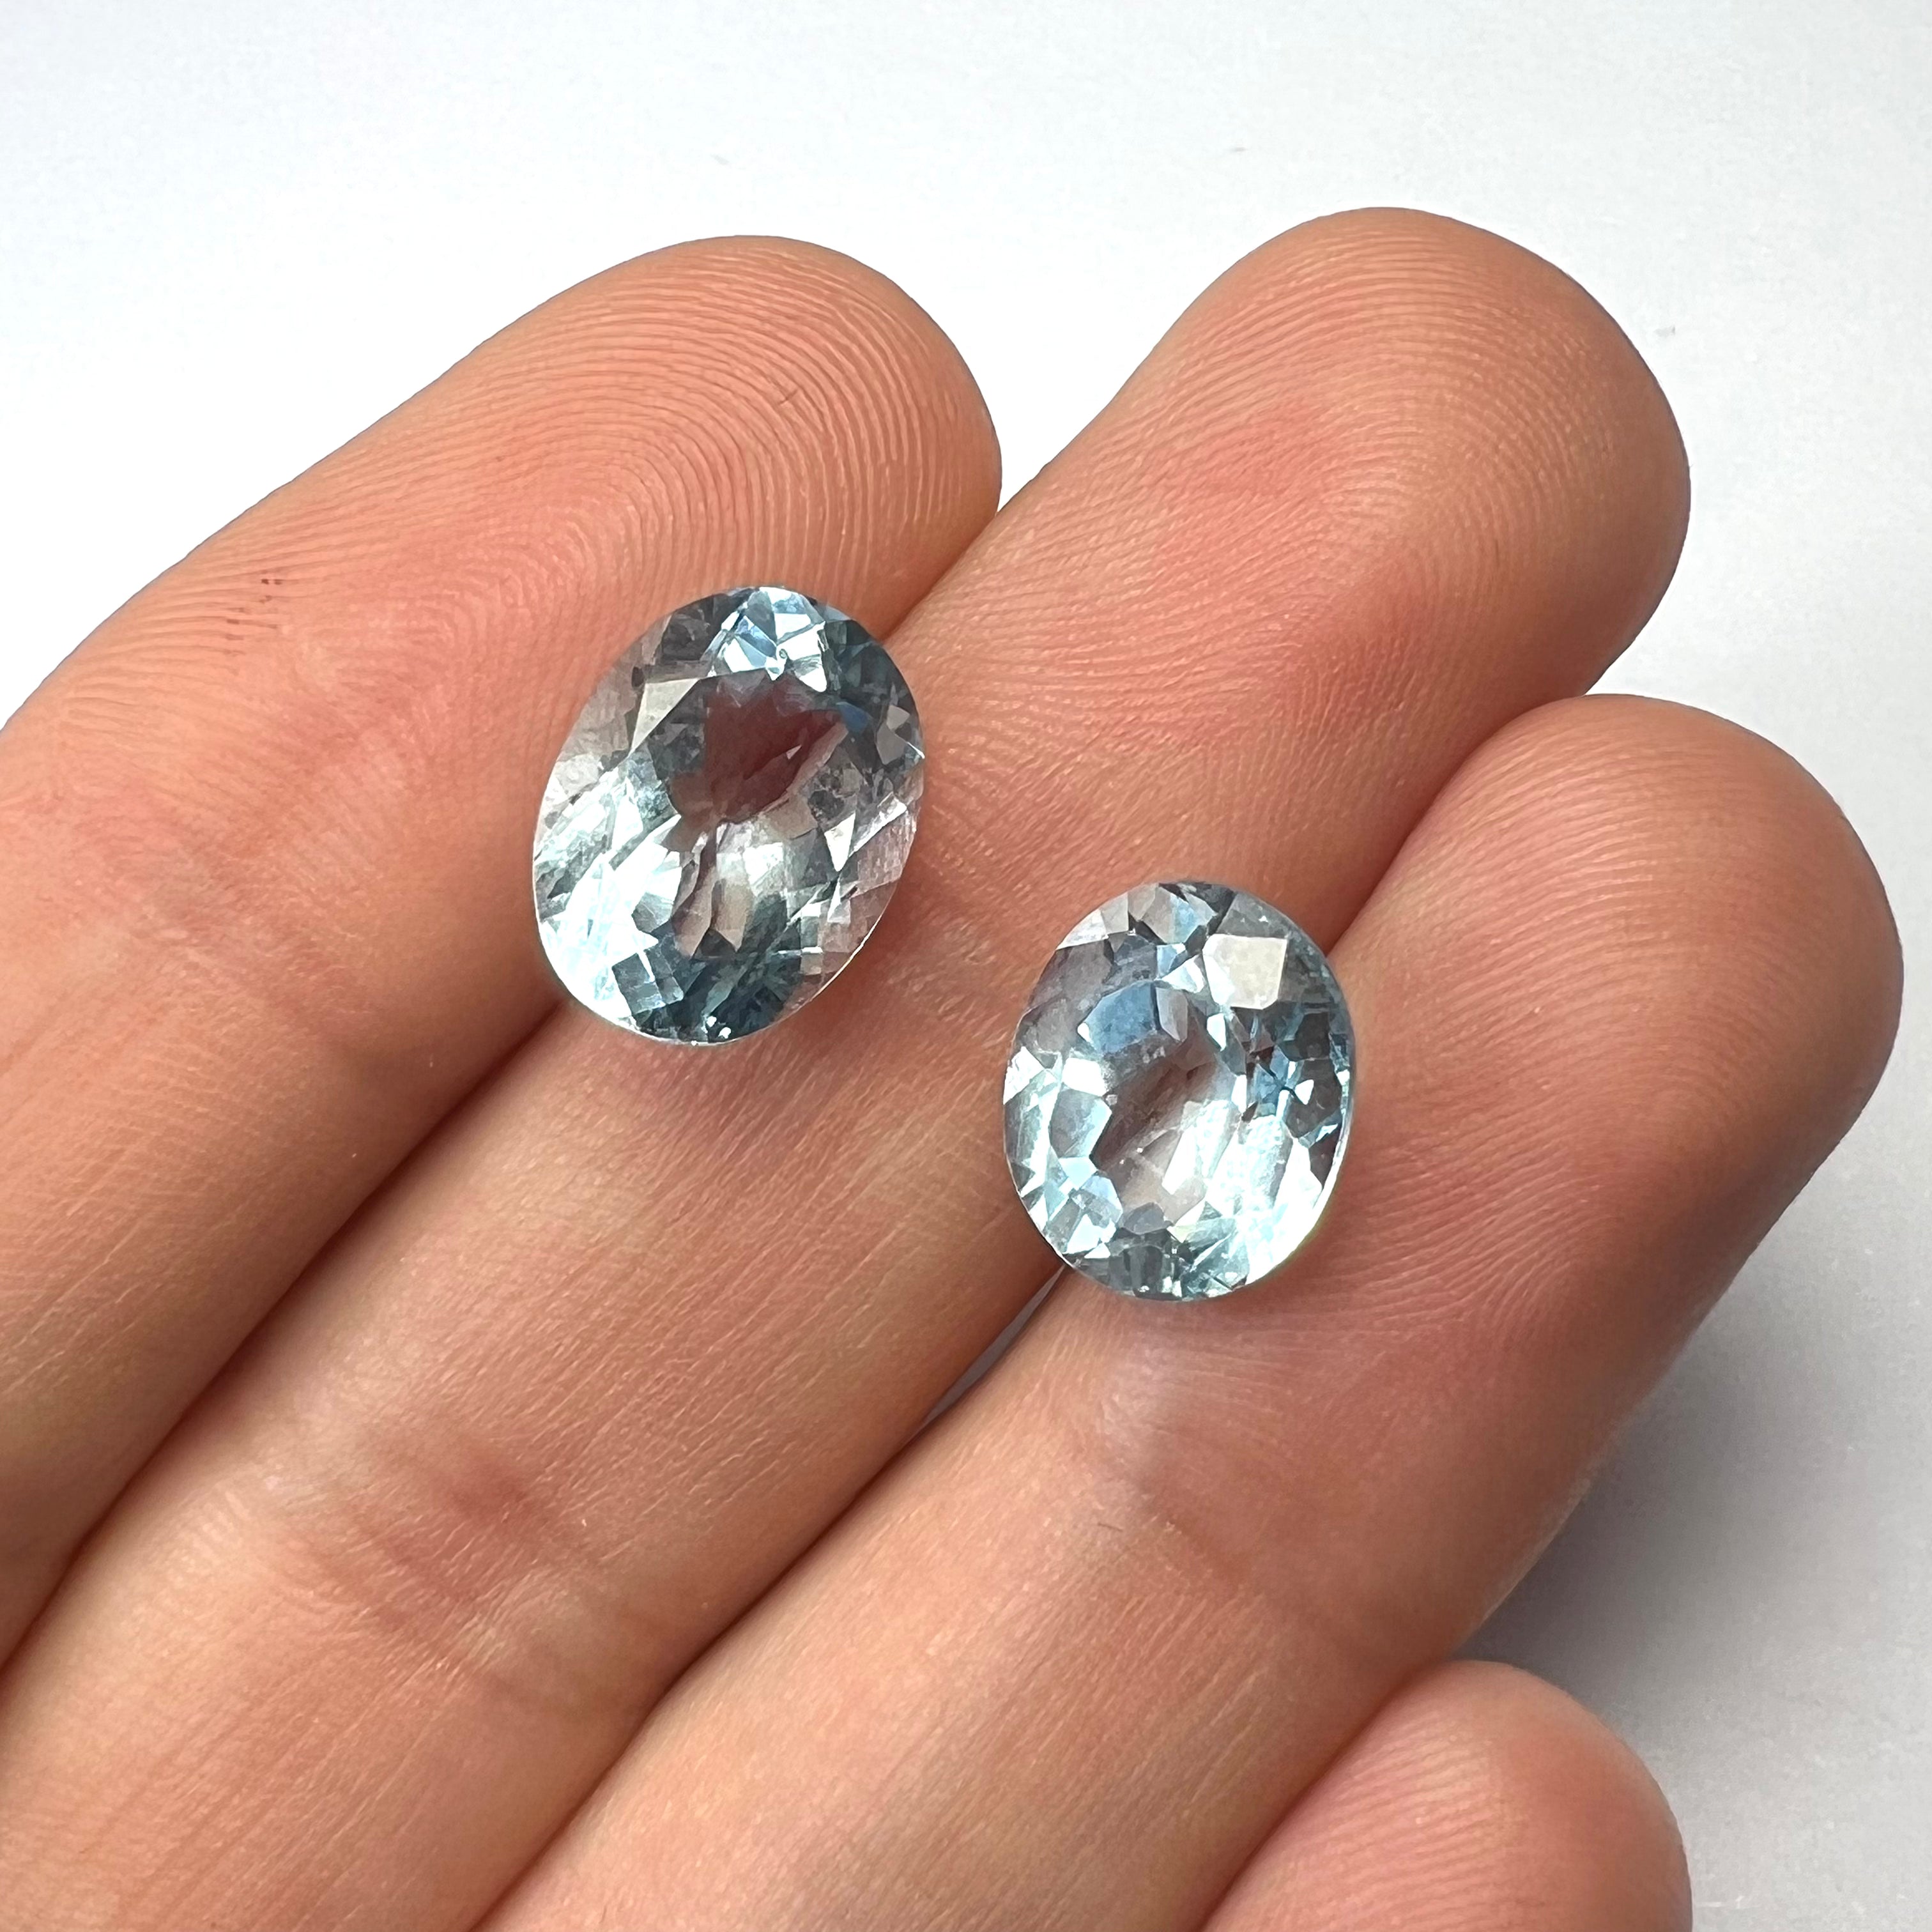 9.97CTW Pair of Loose Natural Oval Cut Topaz 10.95x9.15x6.3mm Earth mined Gemstone